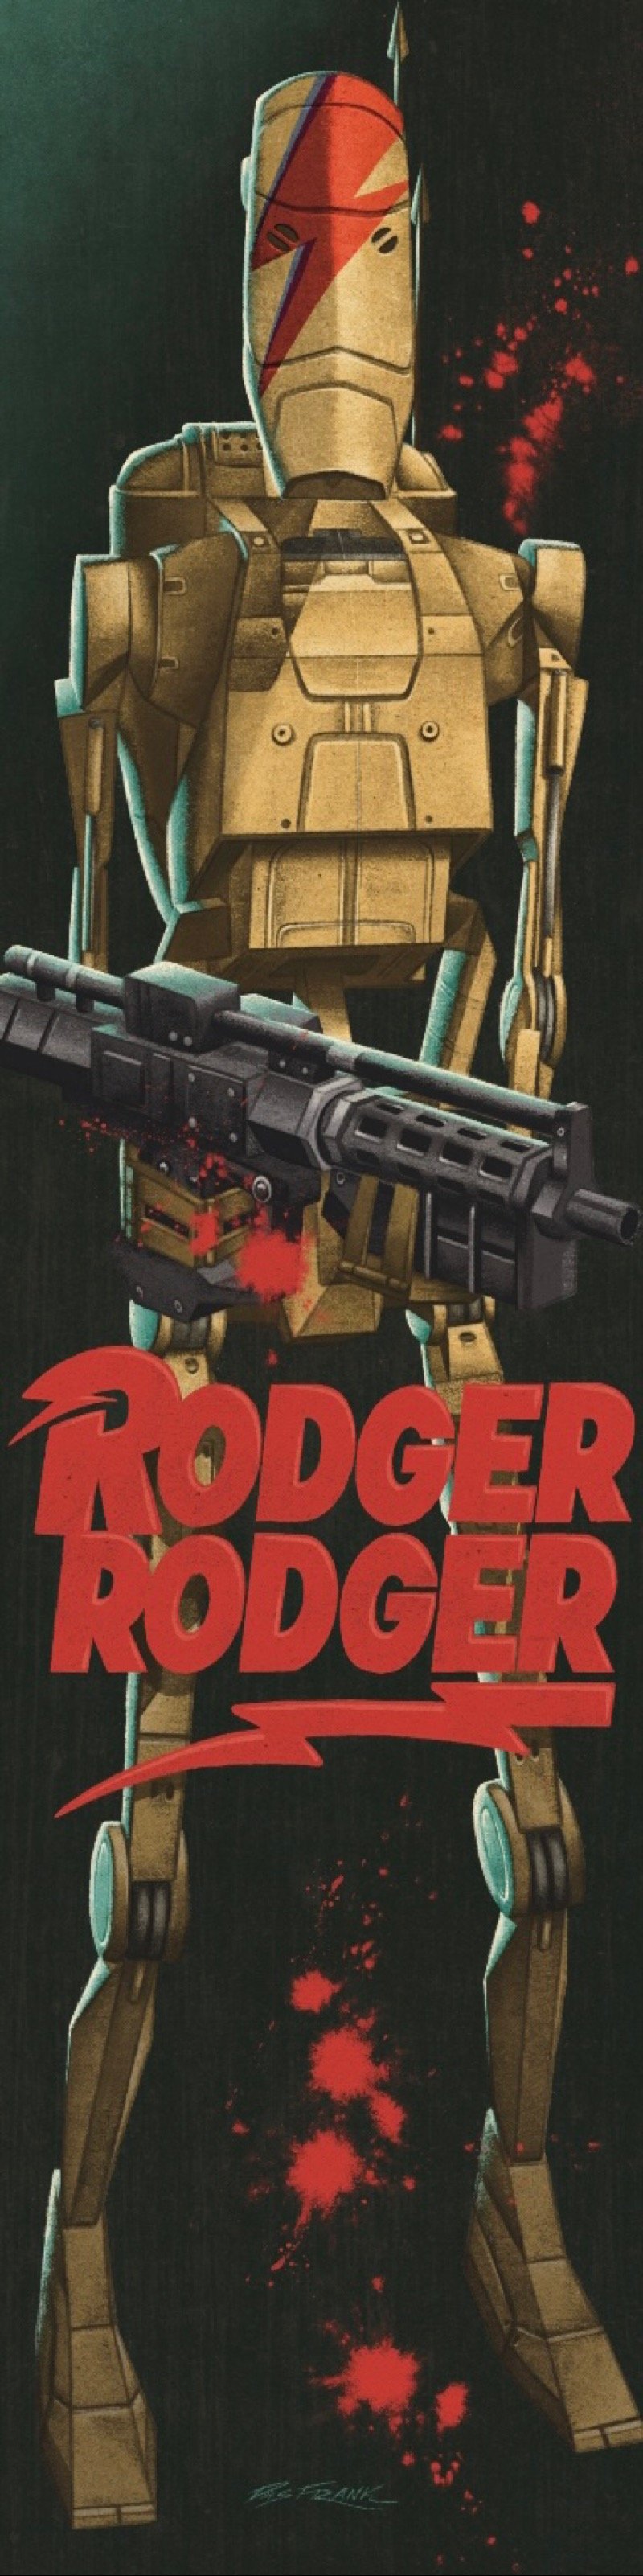 Rodger! Rodger!